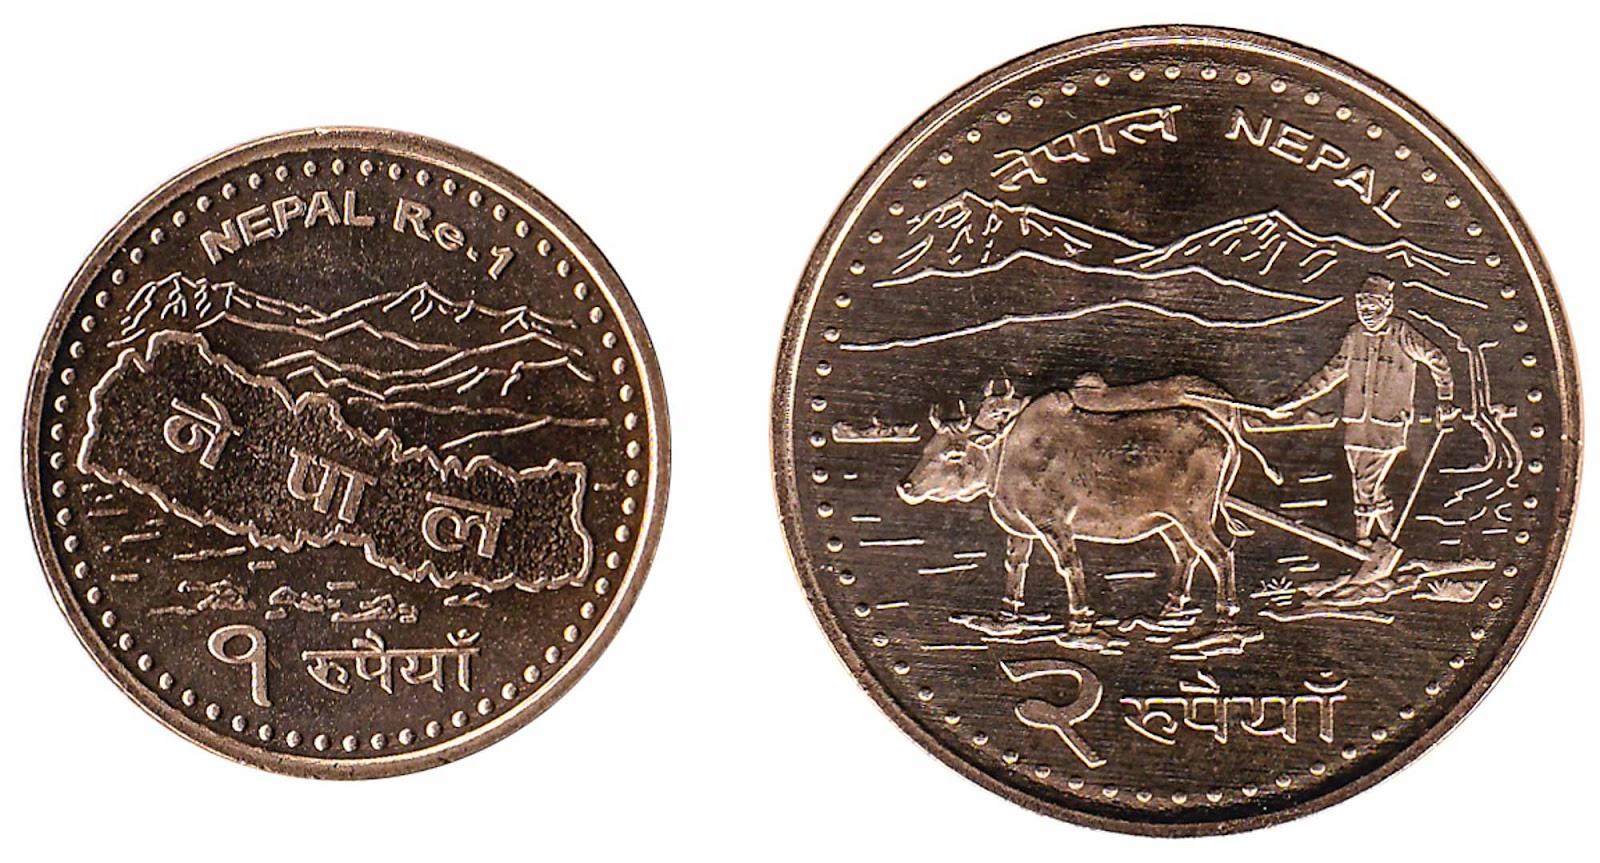 Nepalese rupees coins
